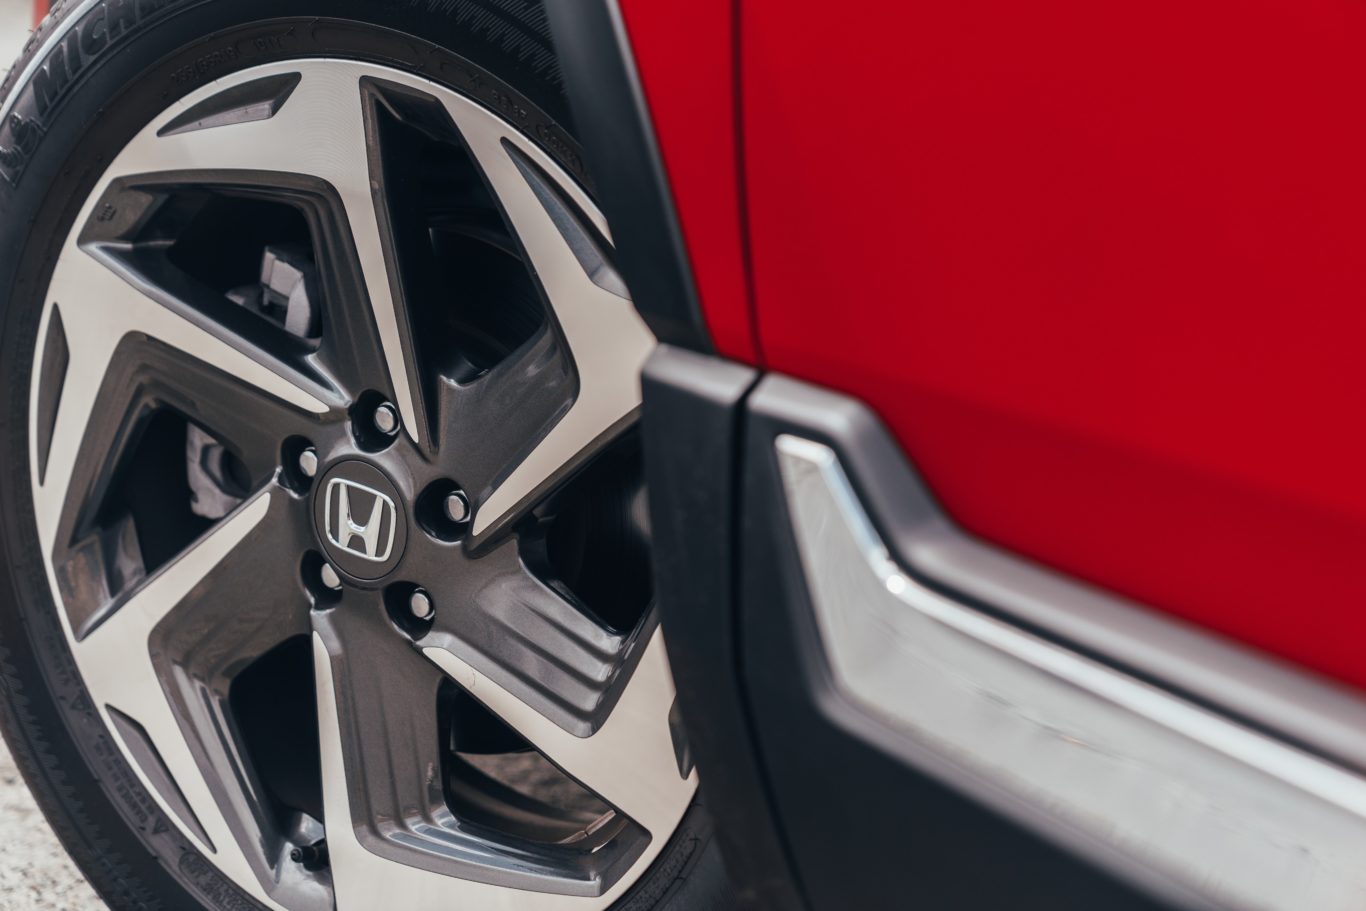 Intricate alloy wheels designs help give the CR-V a premium air